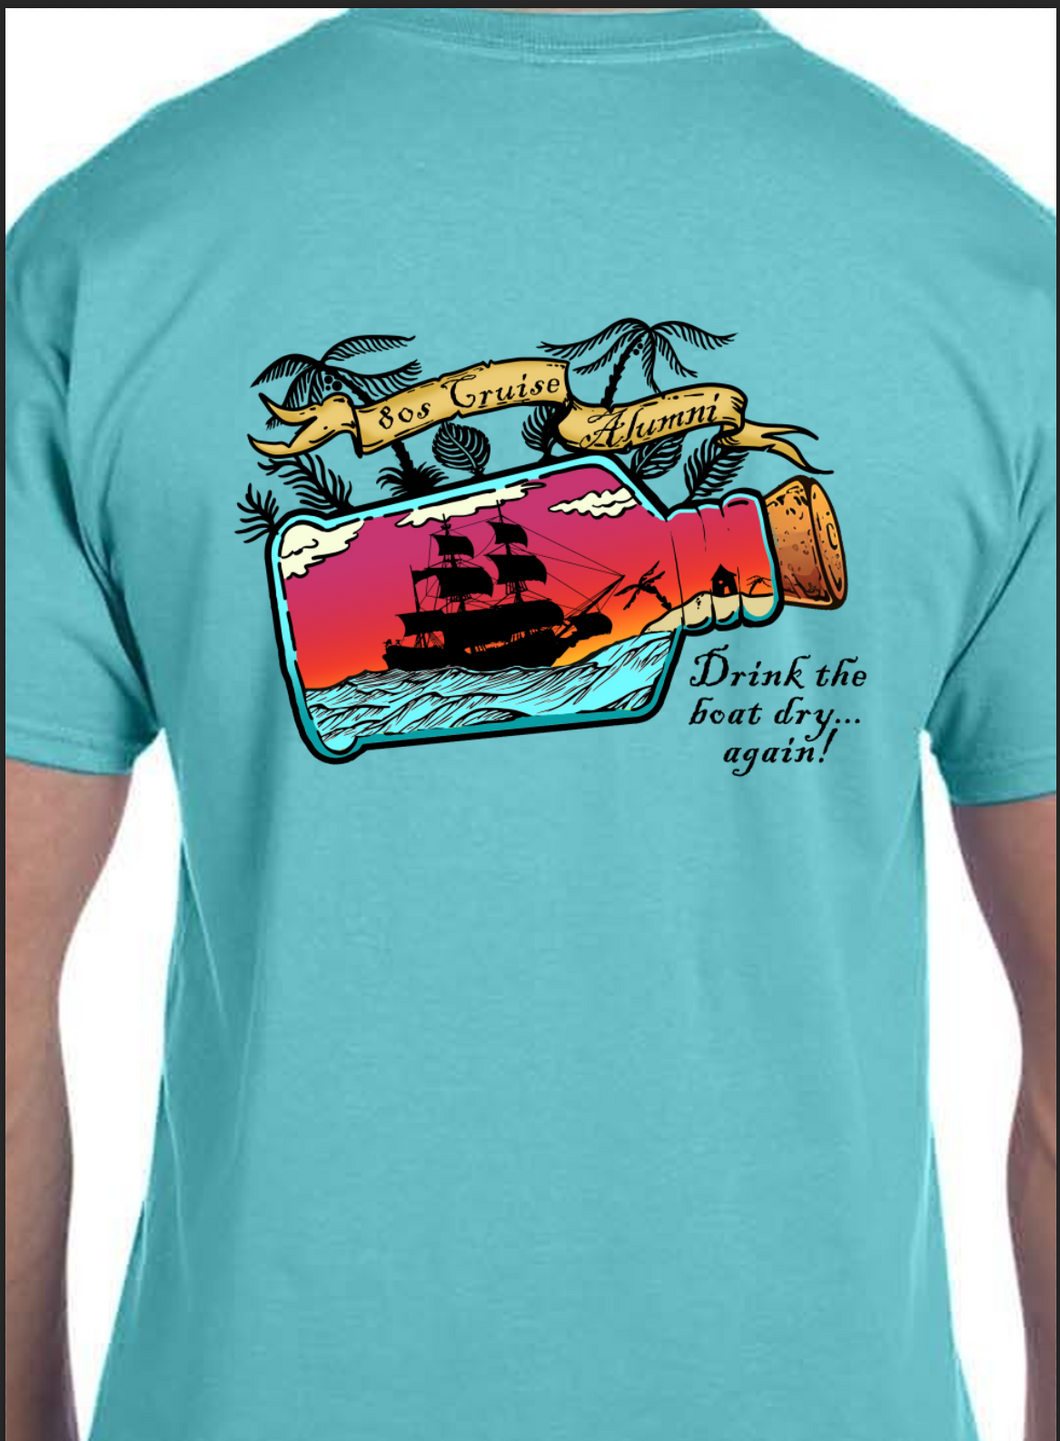 The 80s Cruise Alumni Drink The Boat Dry T-Shirt